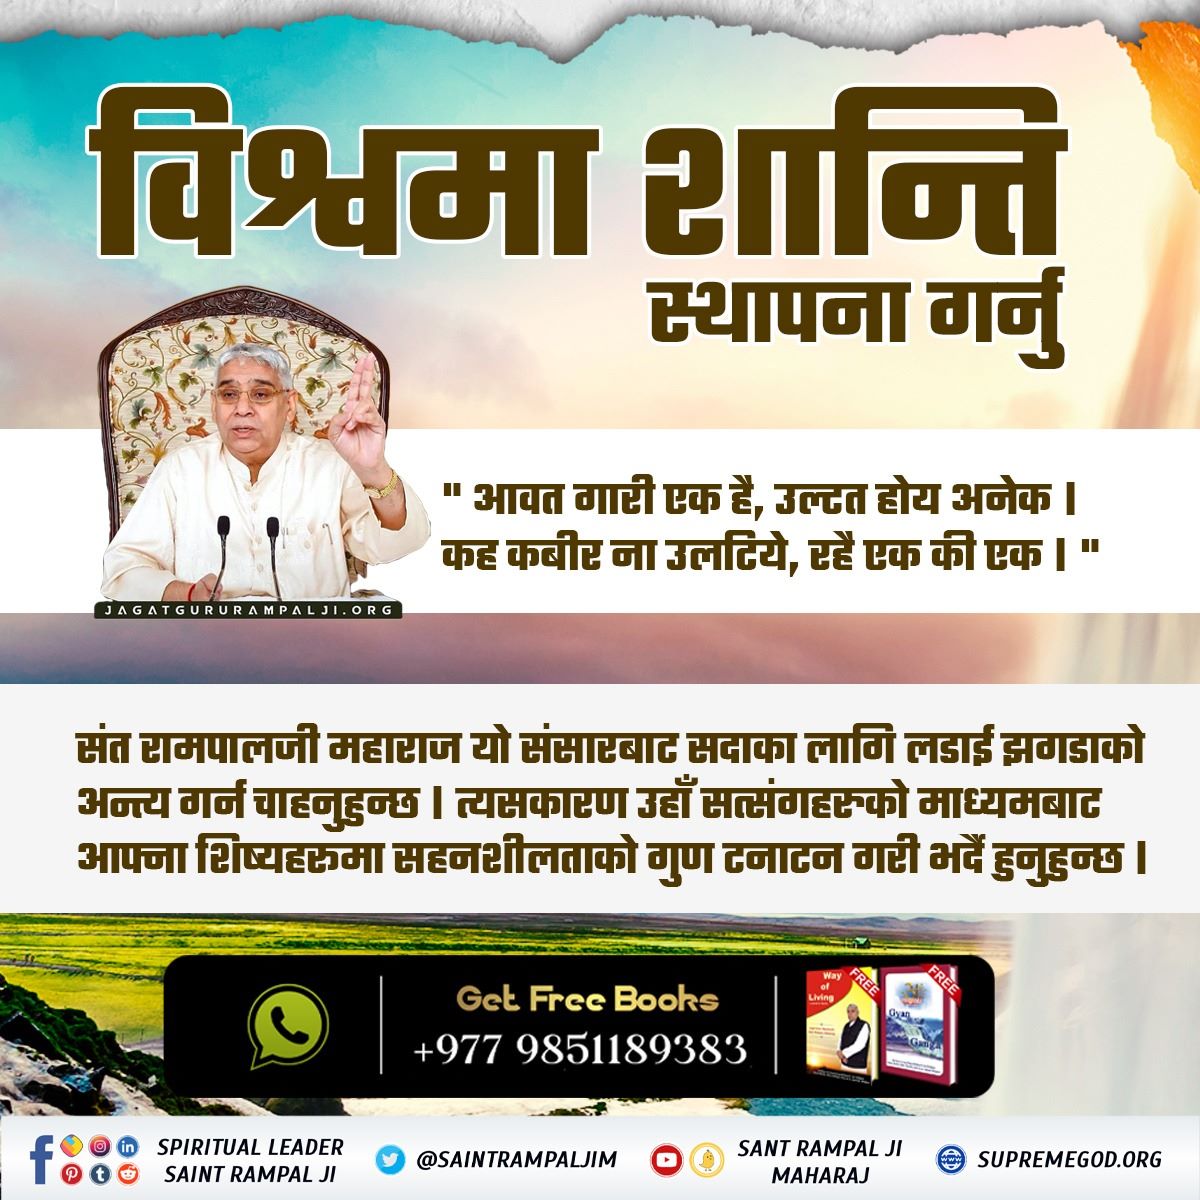 The main #AimOfSantRampalJi is to bring peace all over the world through his pious spiritual knowledge.